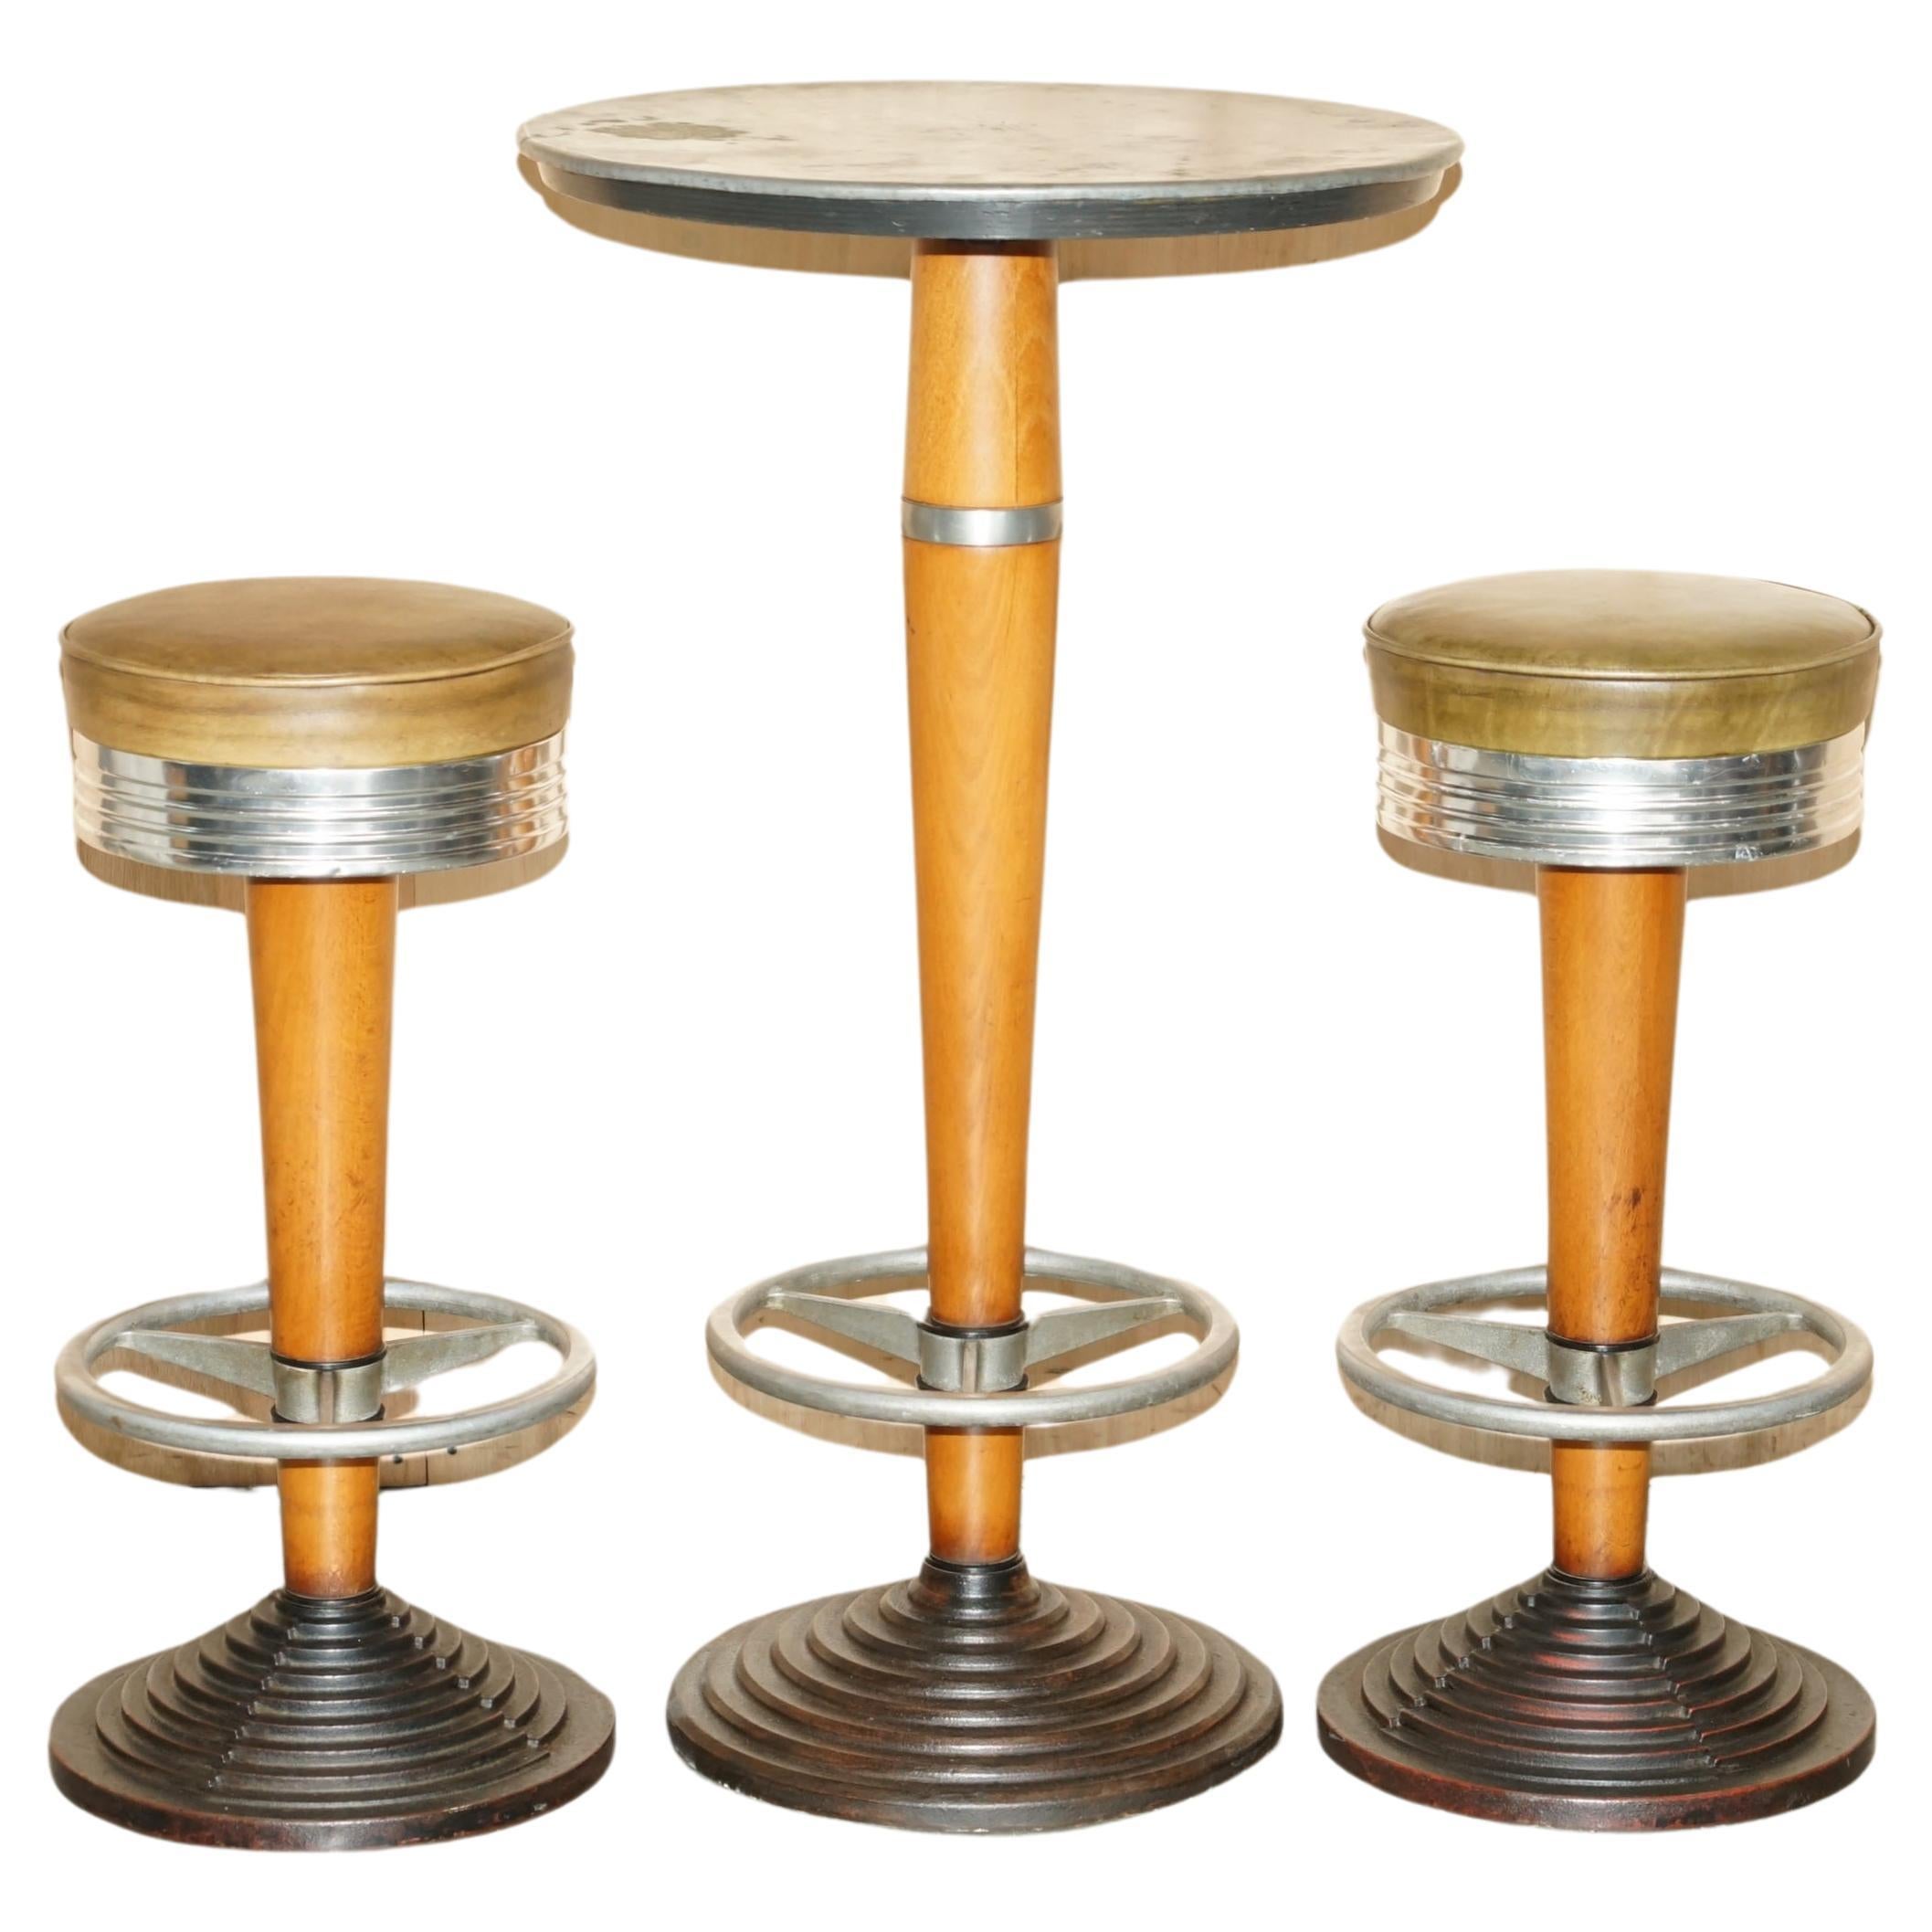 1 OF 2 ANTIQUE ART DECO HIGH BAR TABLE & PAIR OF STOOLS SUITES MUST SEE PICTUREs For Sale